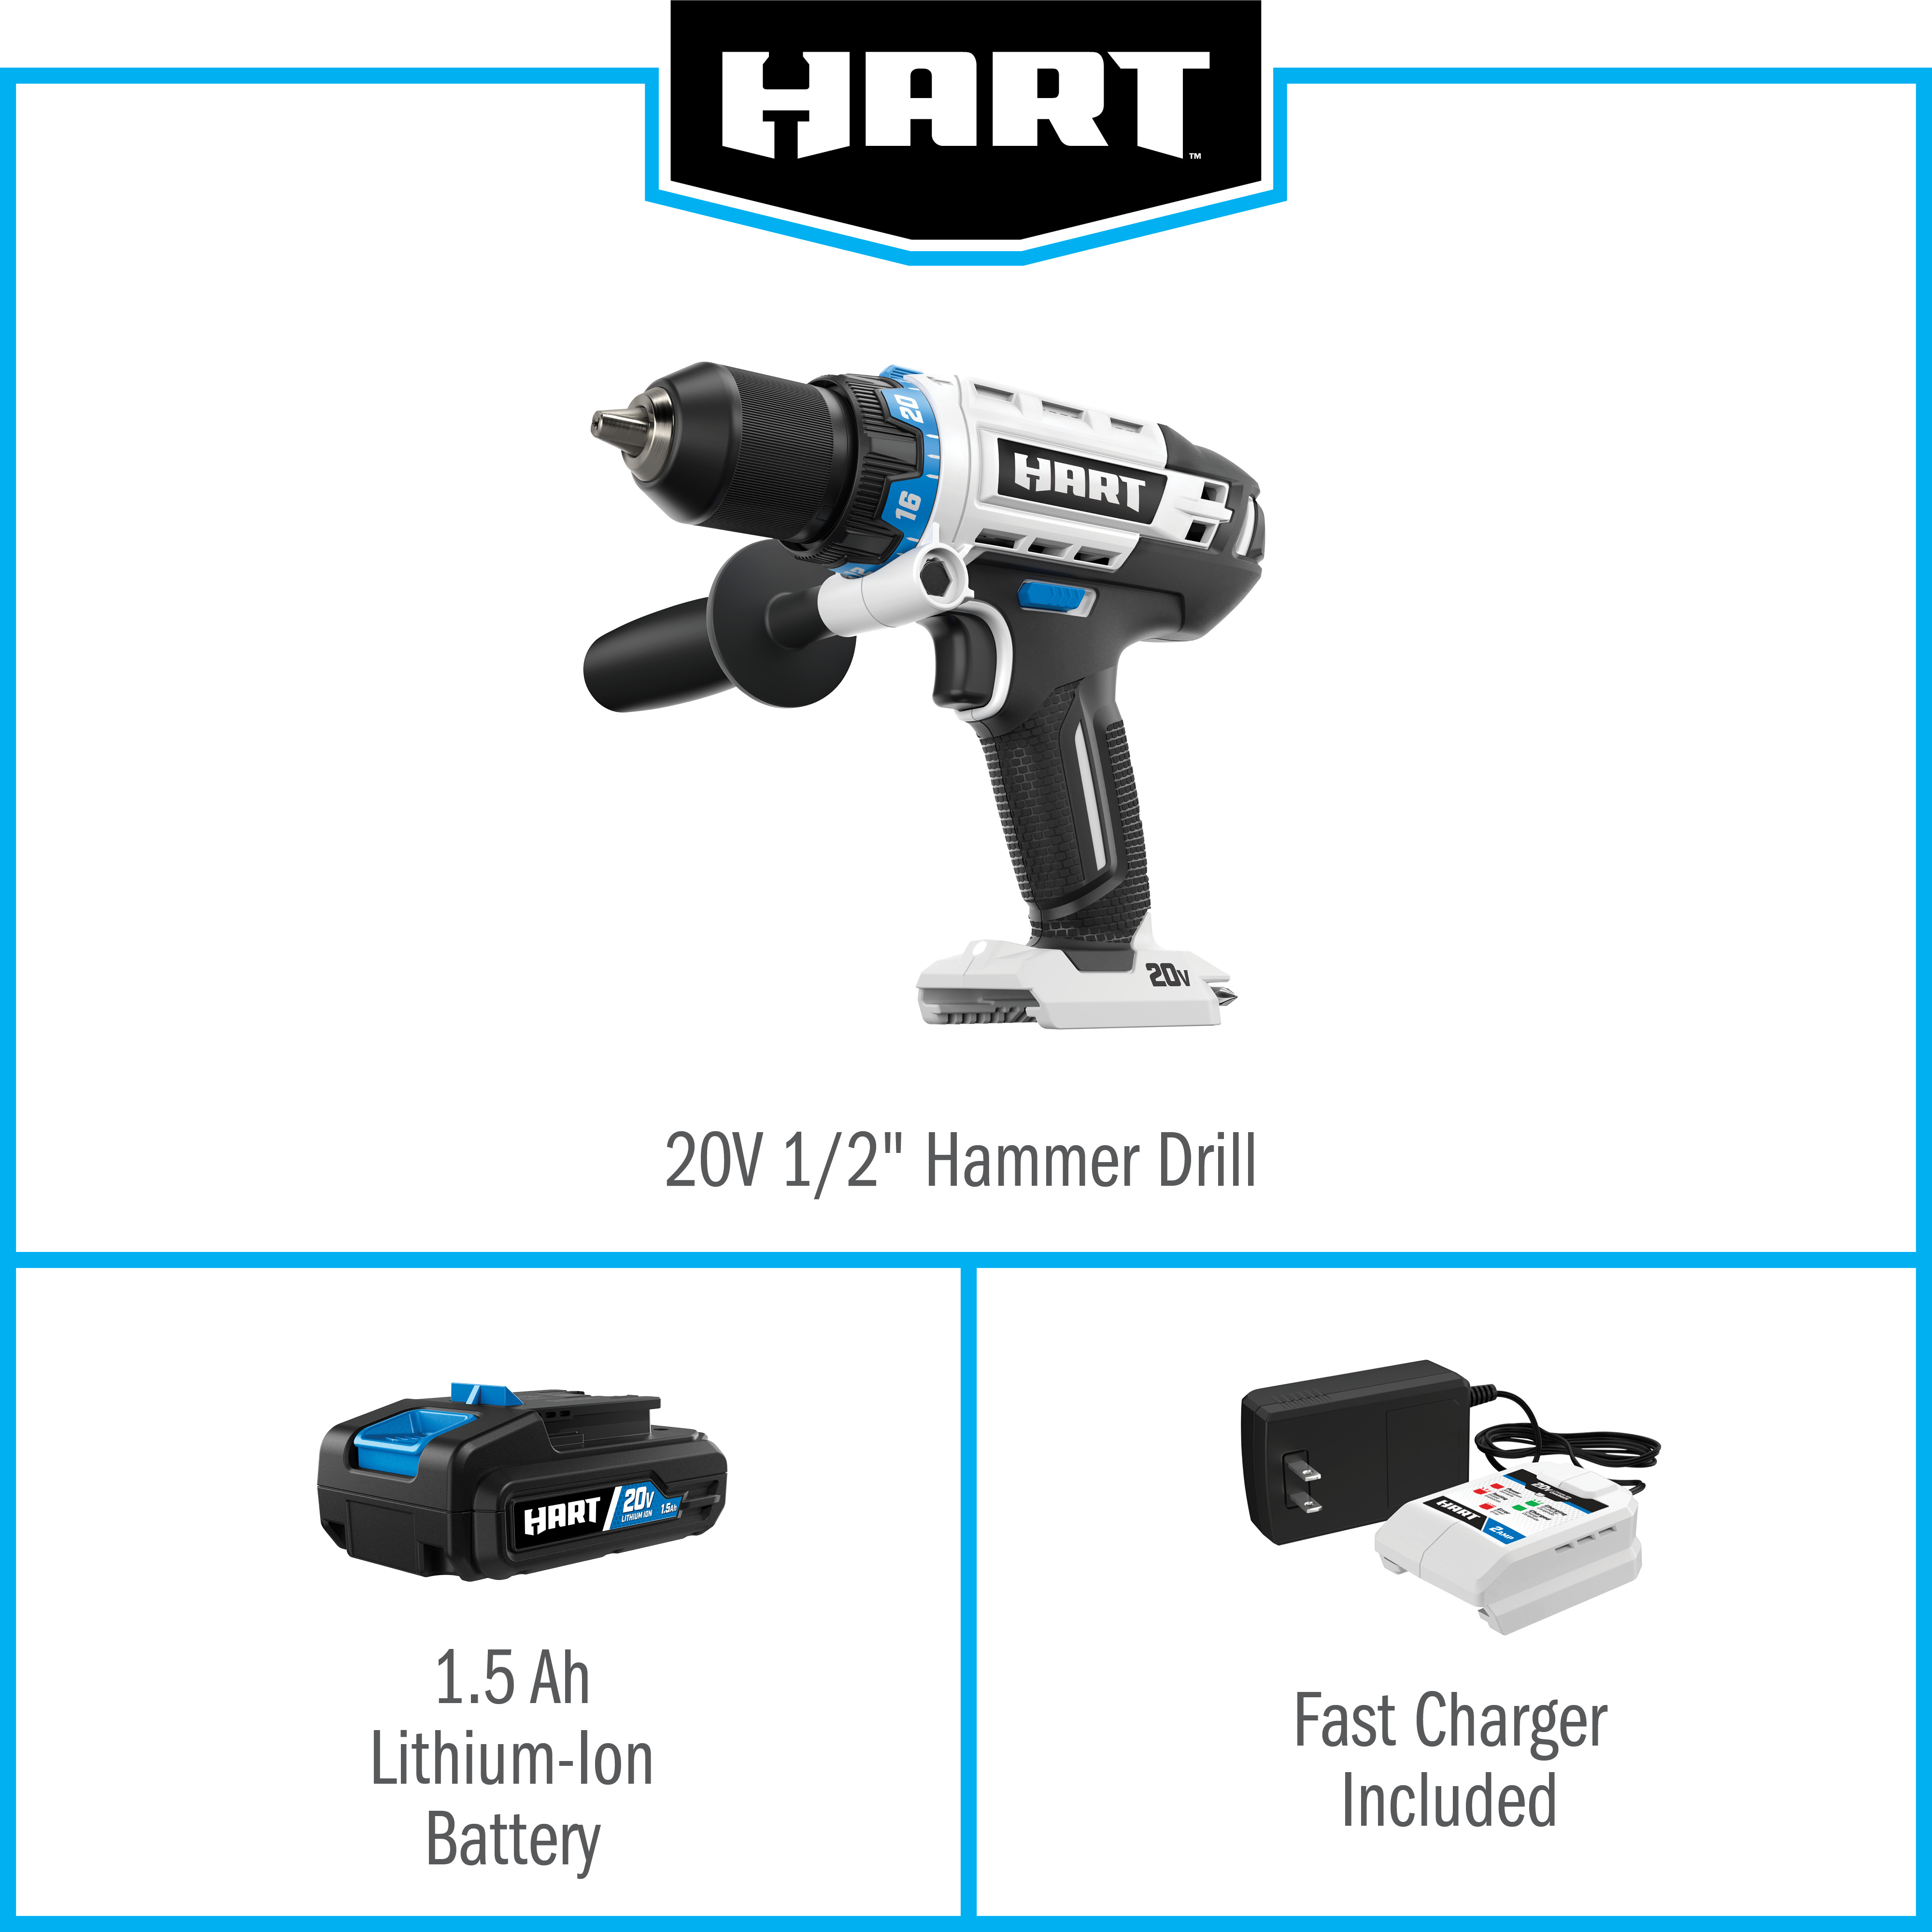 HART 20-Volt Cordless 1/2-inch Hammer Drill Kit (1) 1.5Ah Lithium-Ion Battery - image 3 of 11